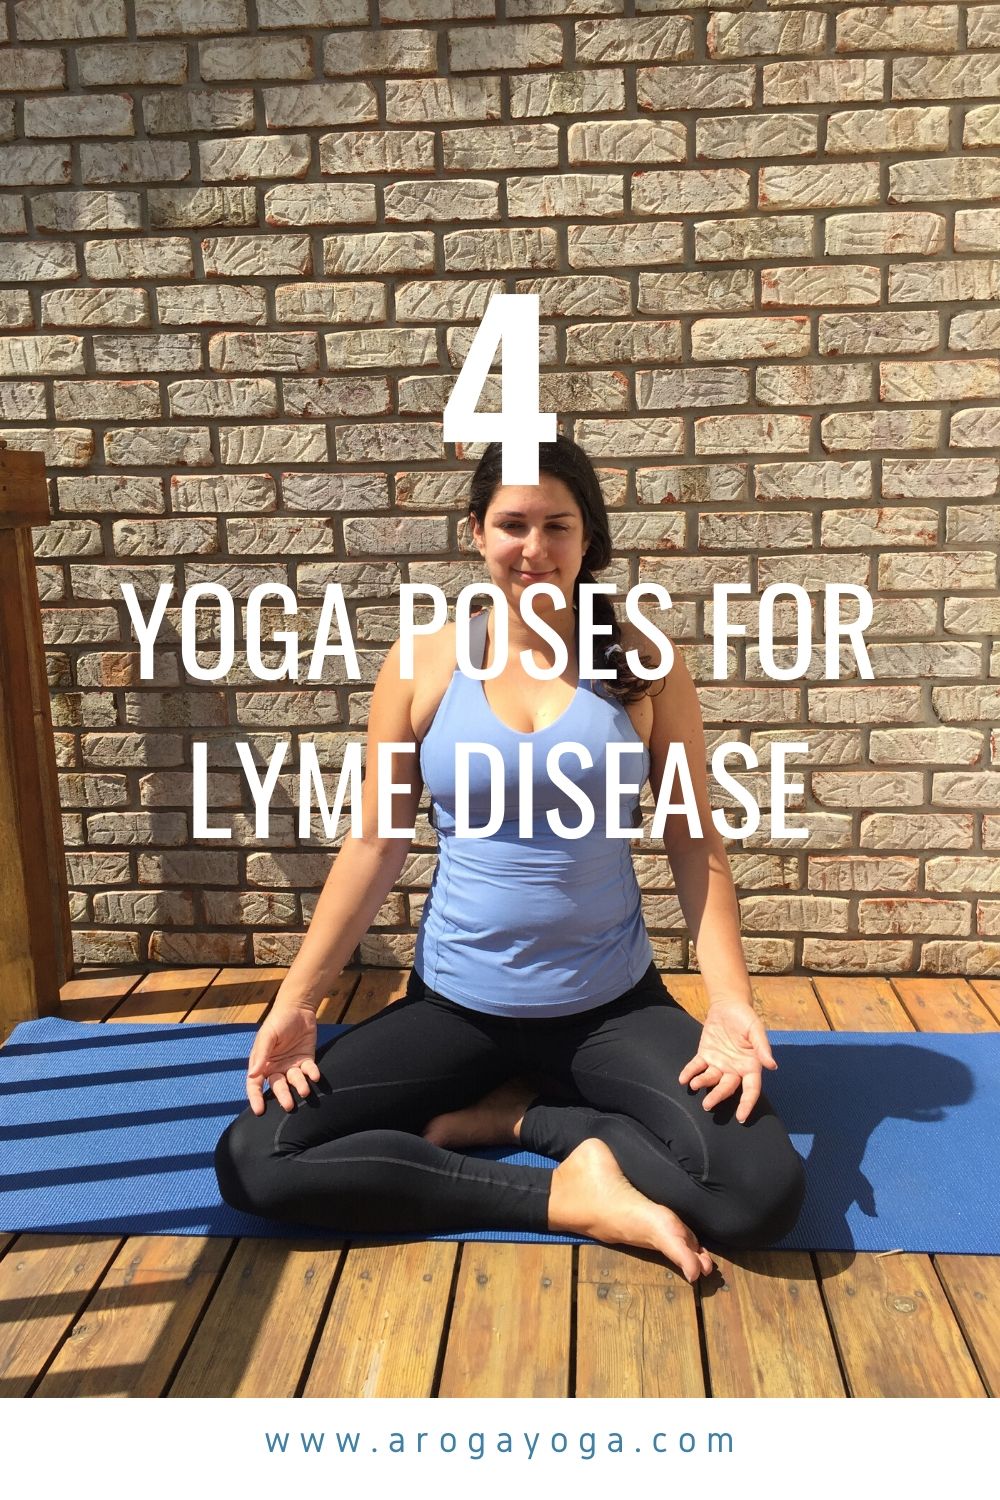 4 yoga poses for lyme disease